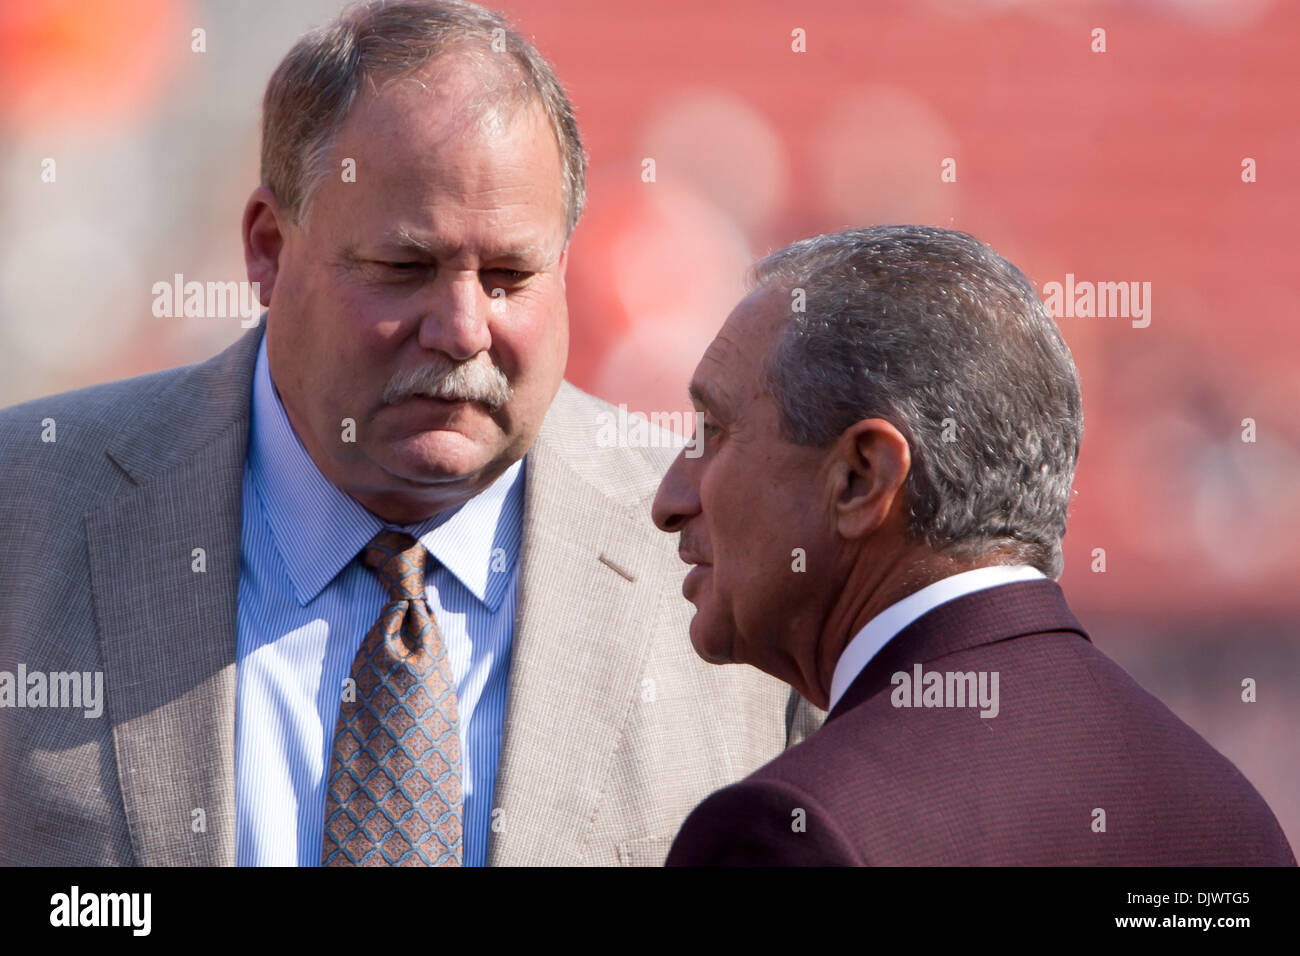 Transcript of Cleveland Browns President Mike Holmgren announcing team's  Ring of Honor 